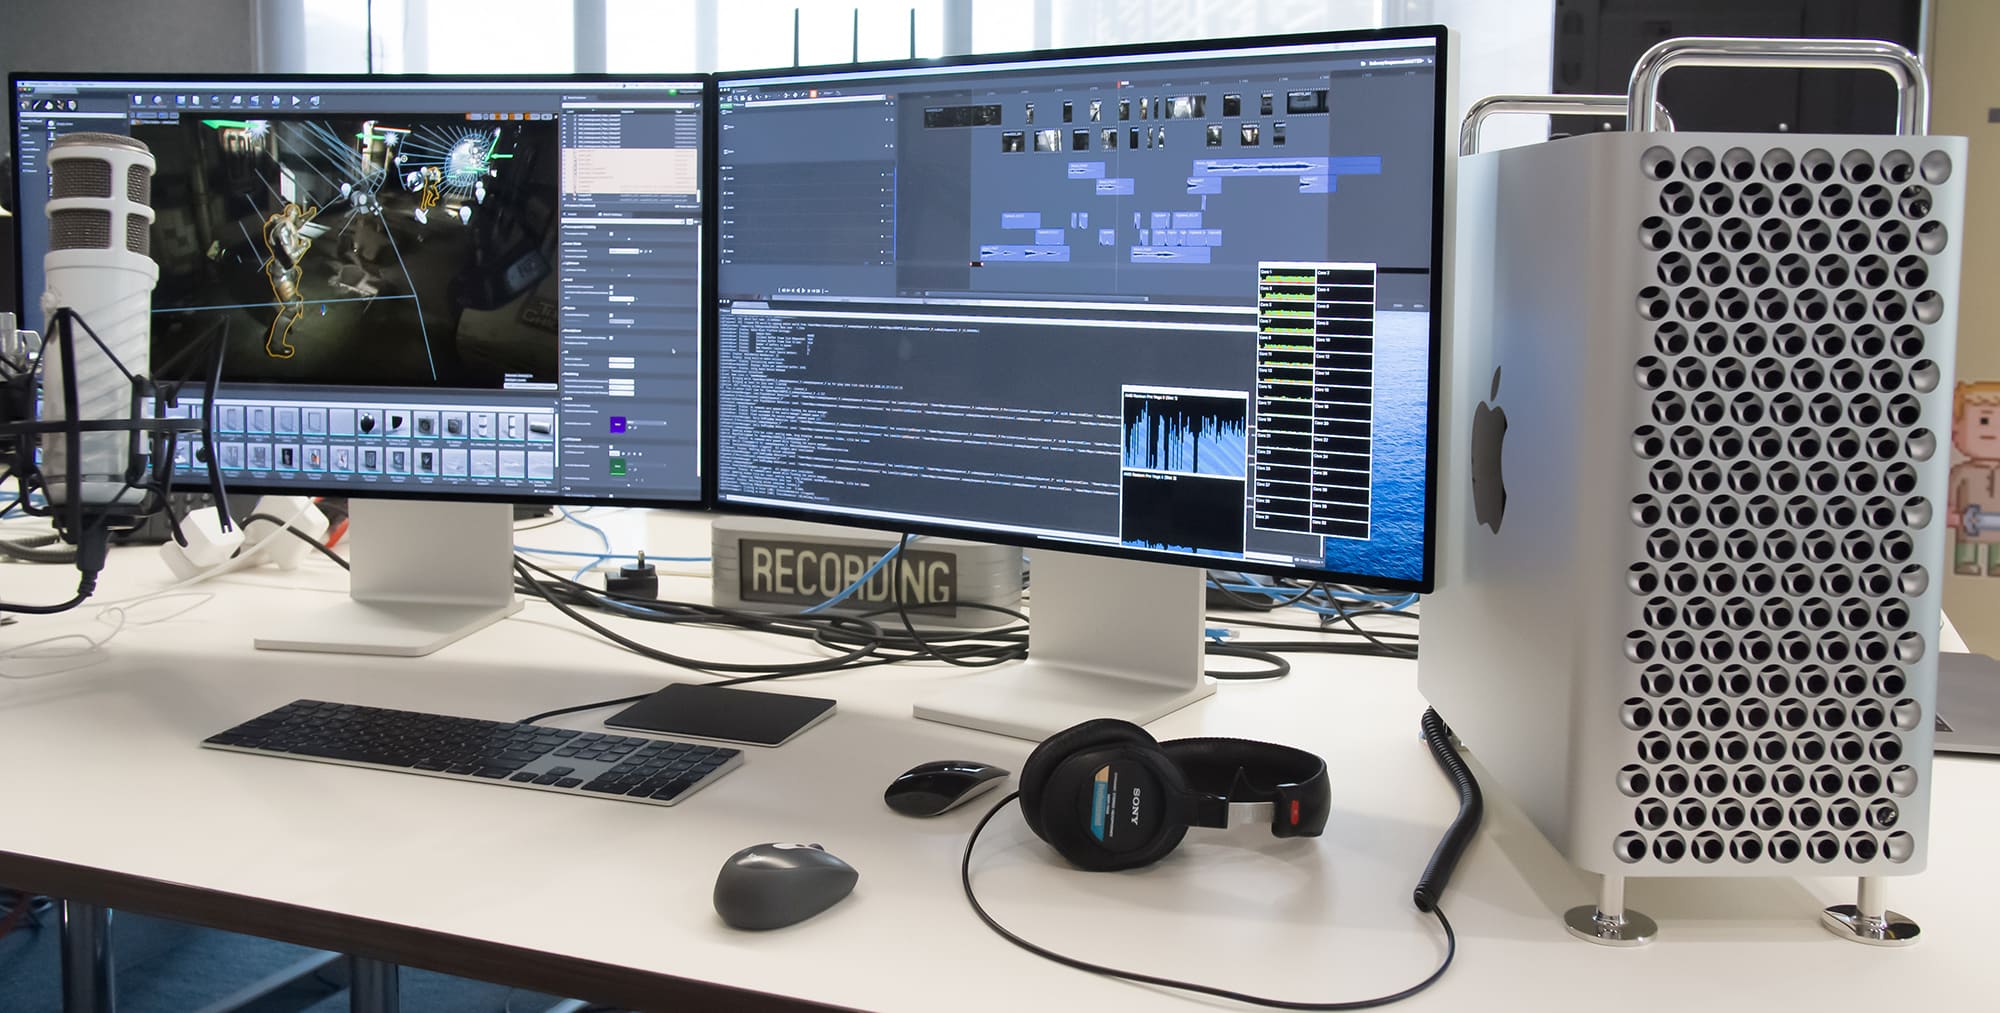 imac or mac pro for video editing